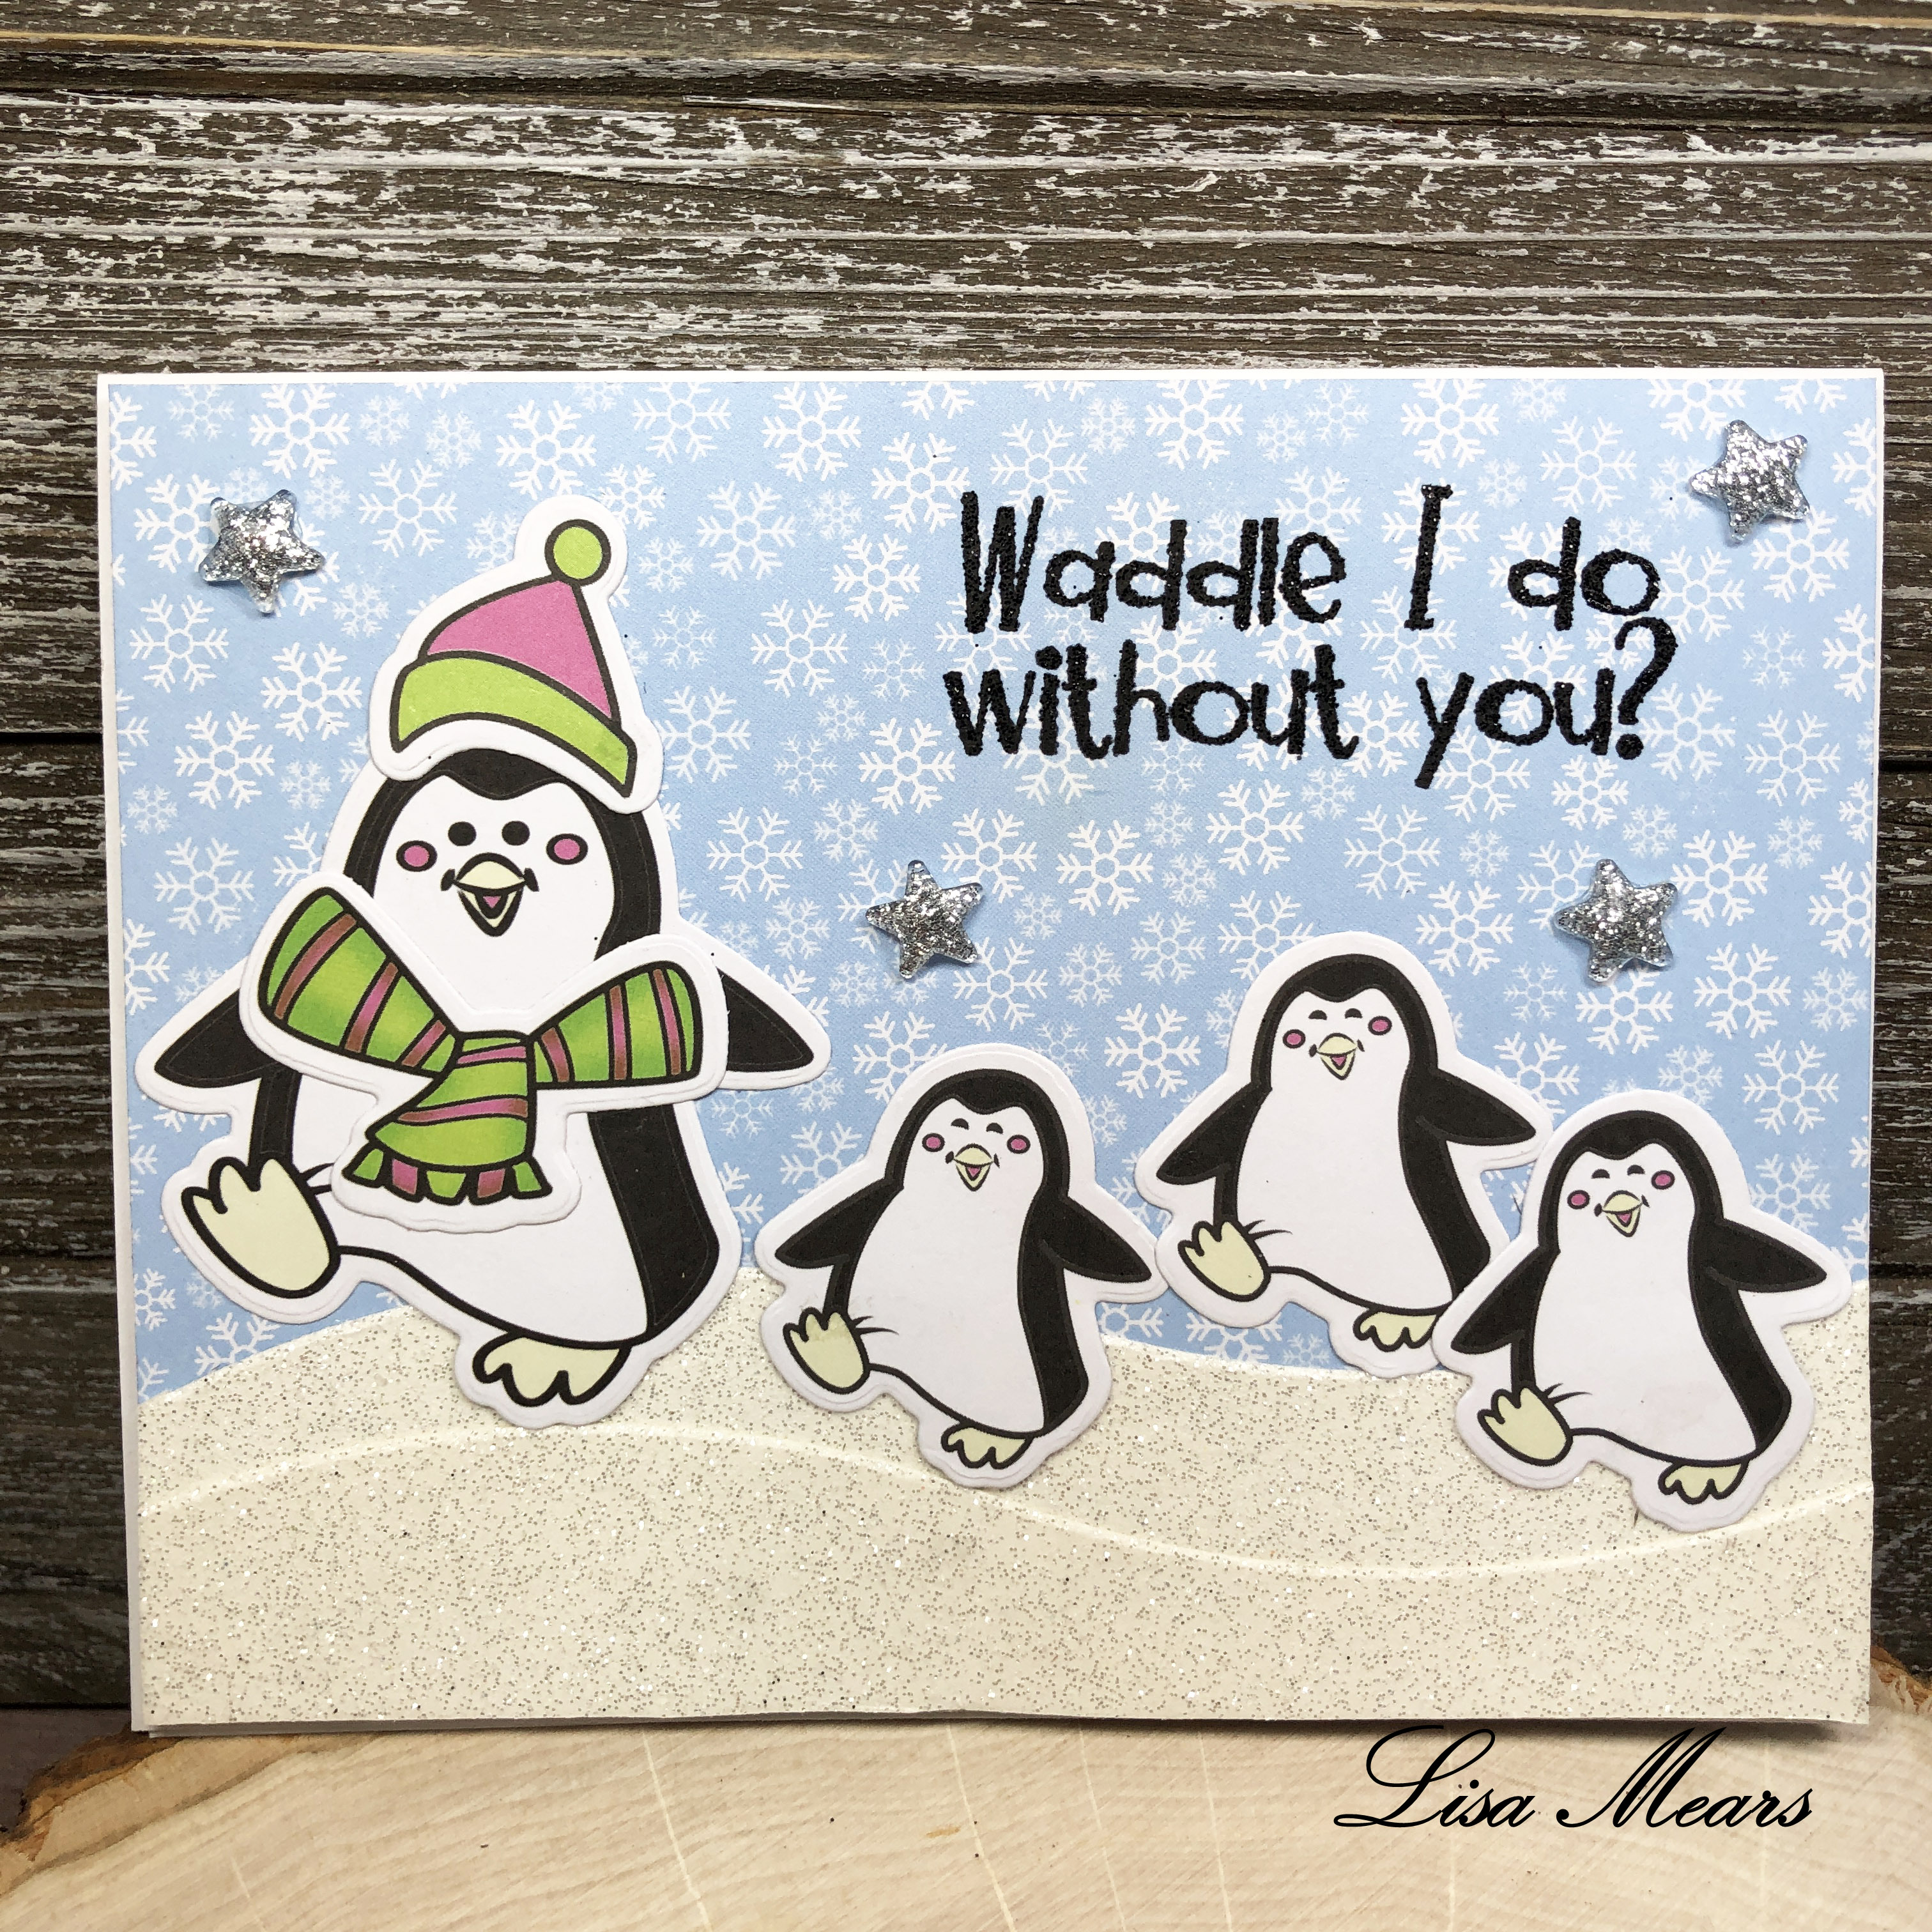 The Stamps of Life November Card Kit and WaddlePenguins2Stamp